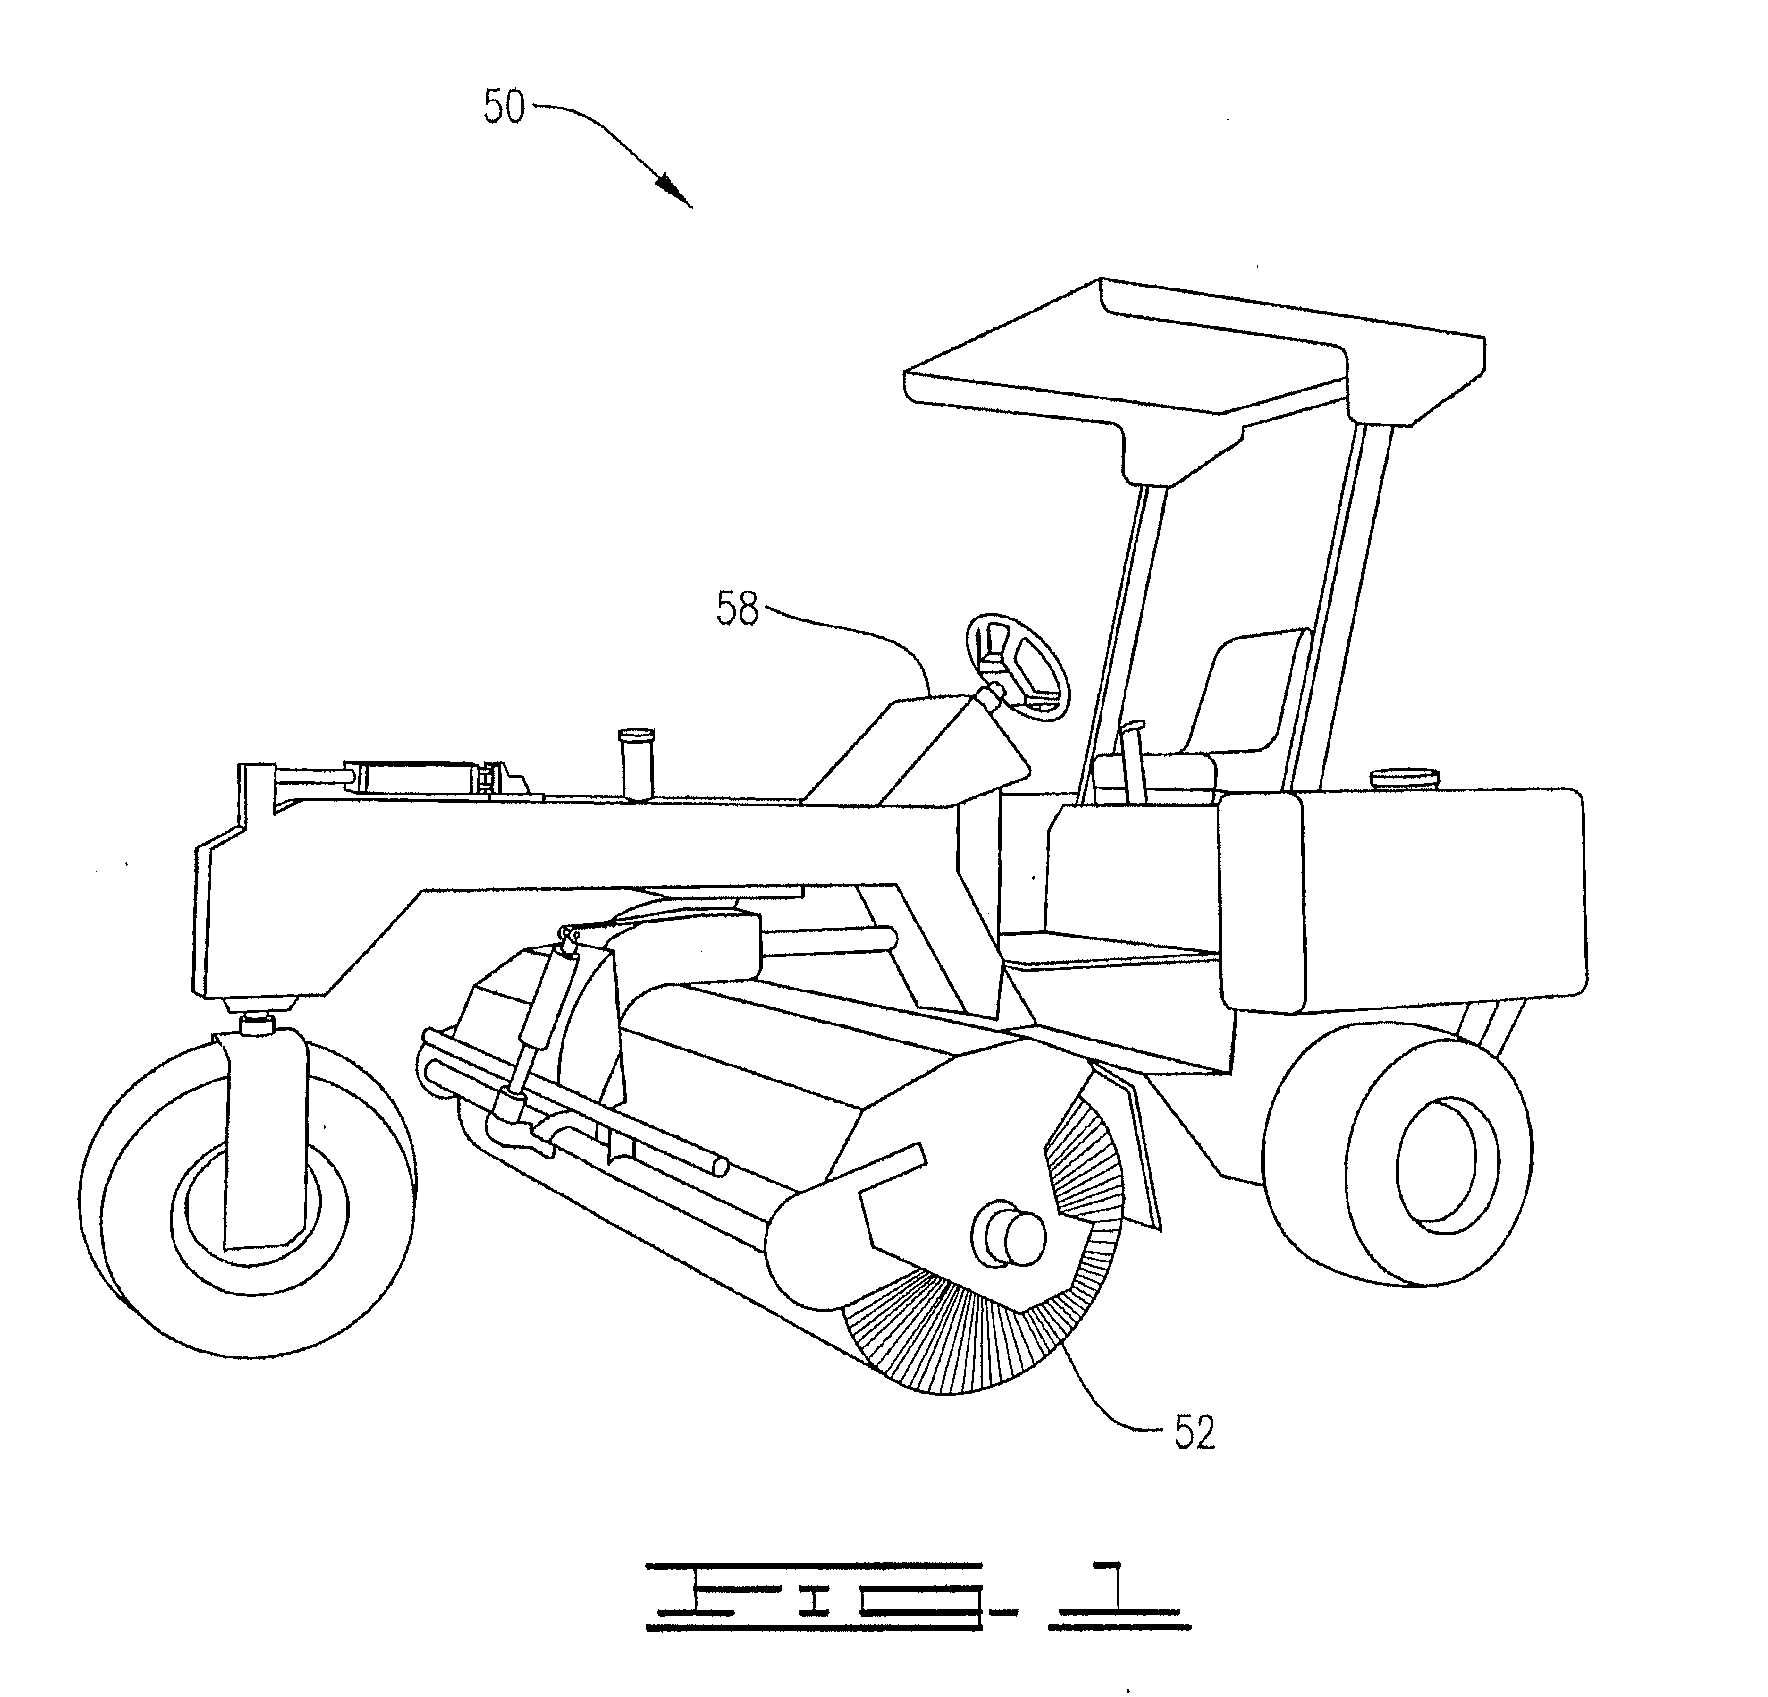 Hydraulic control system for use with a turf sweeper